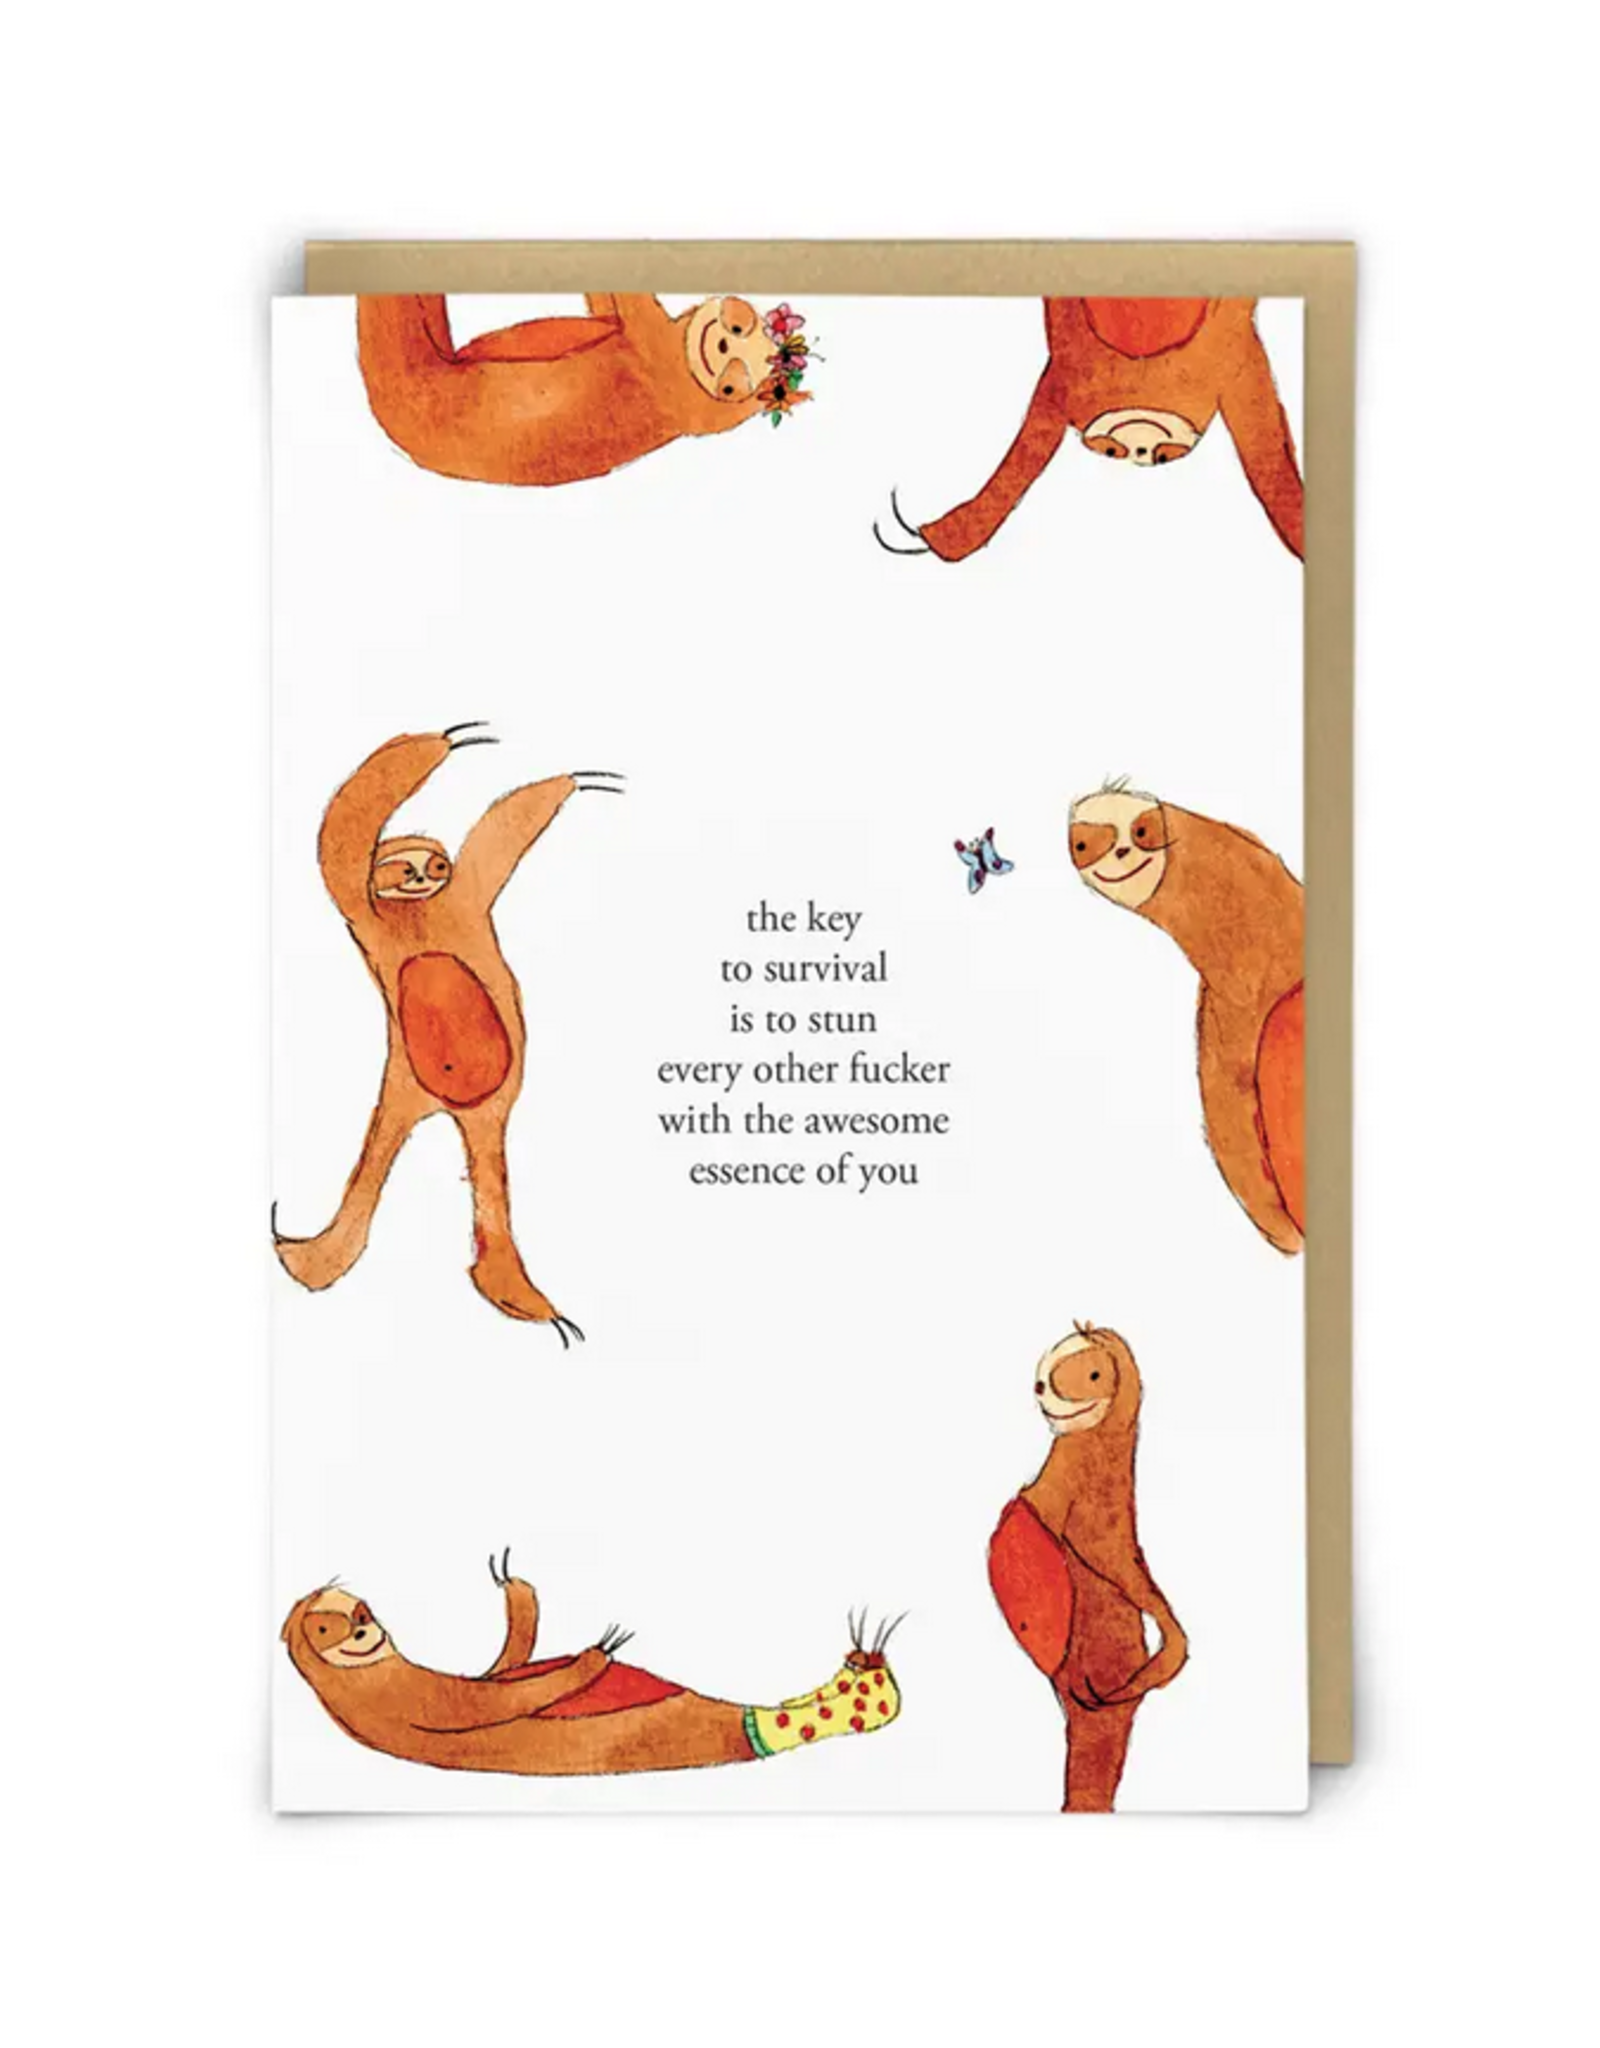 Awesome Essence of You Sloth Greeting Card